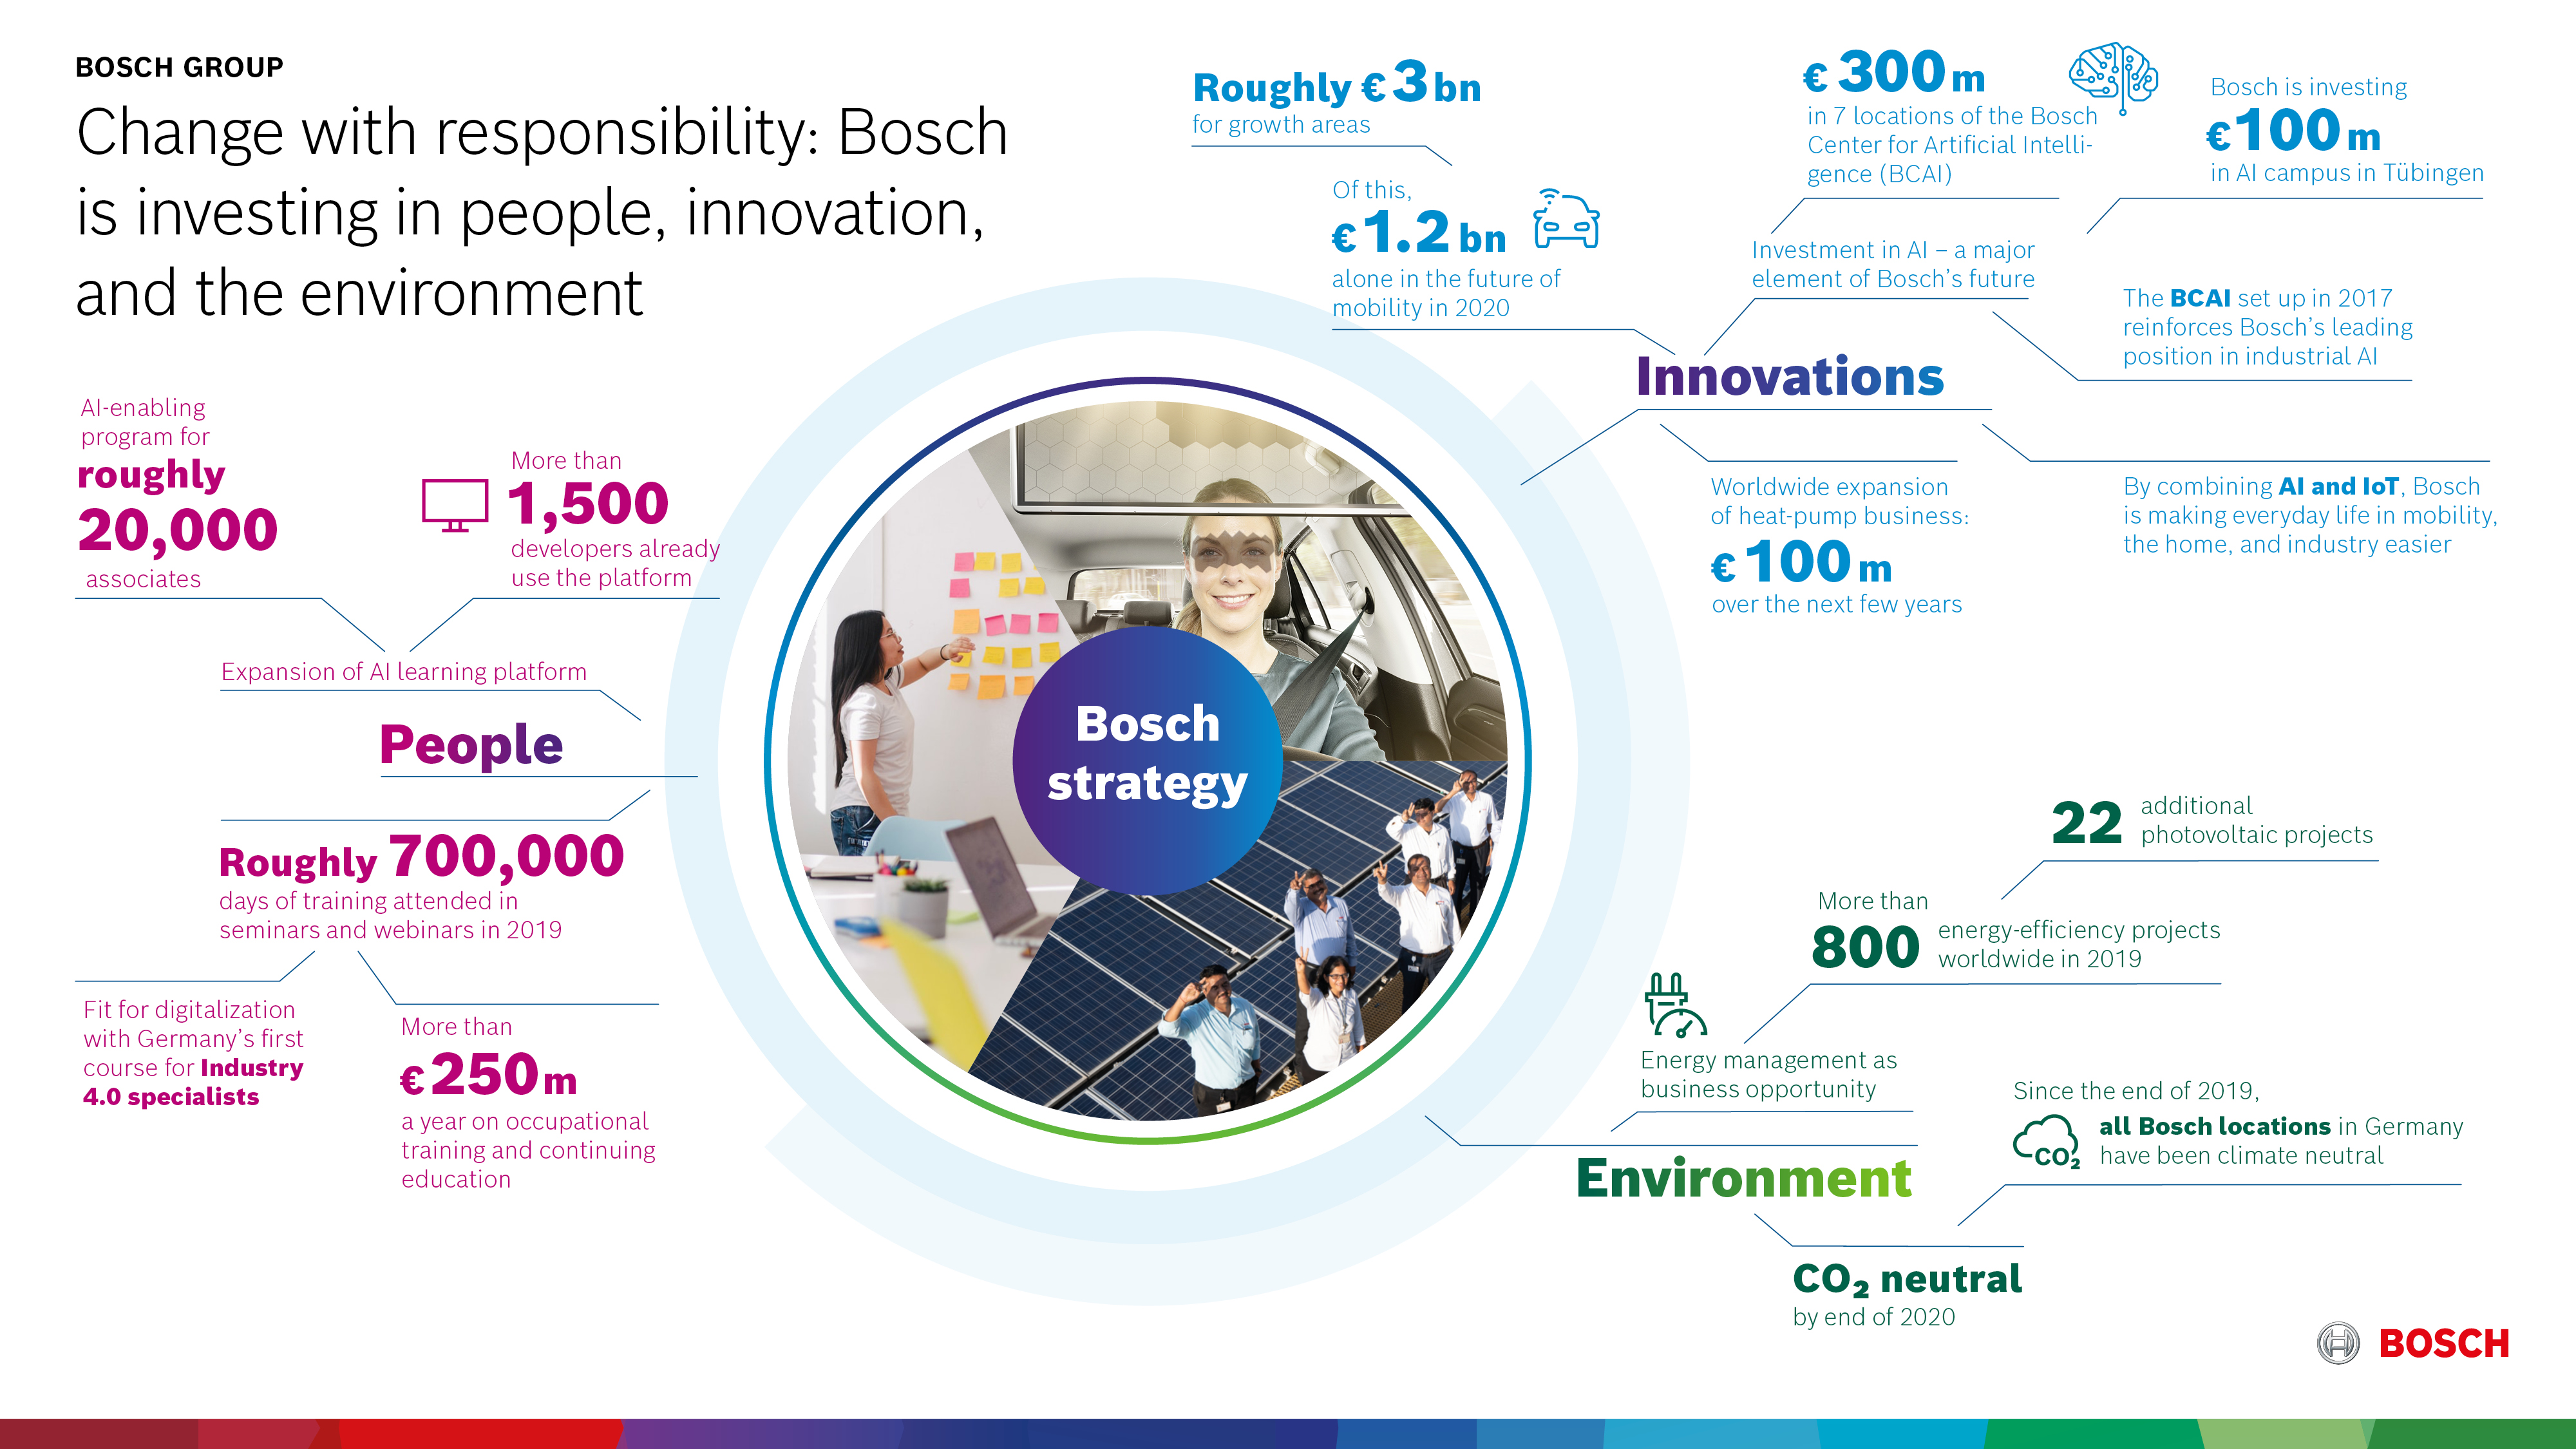 Tackling the transformation responsibly: Bosch is investing in people, innovations, and the environment